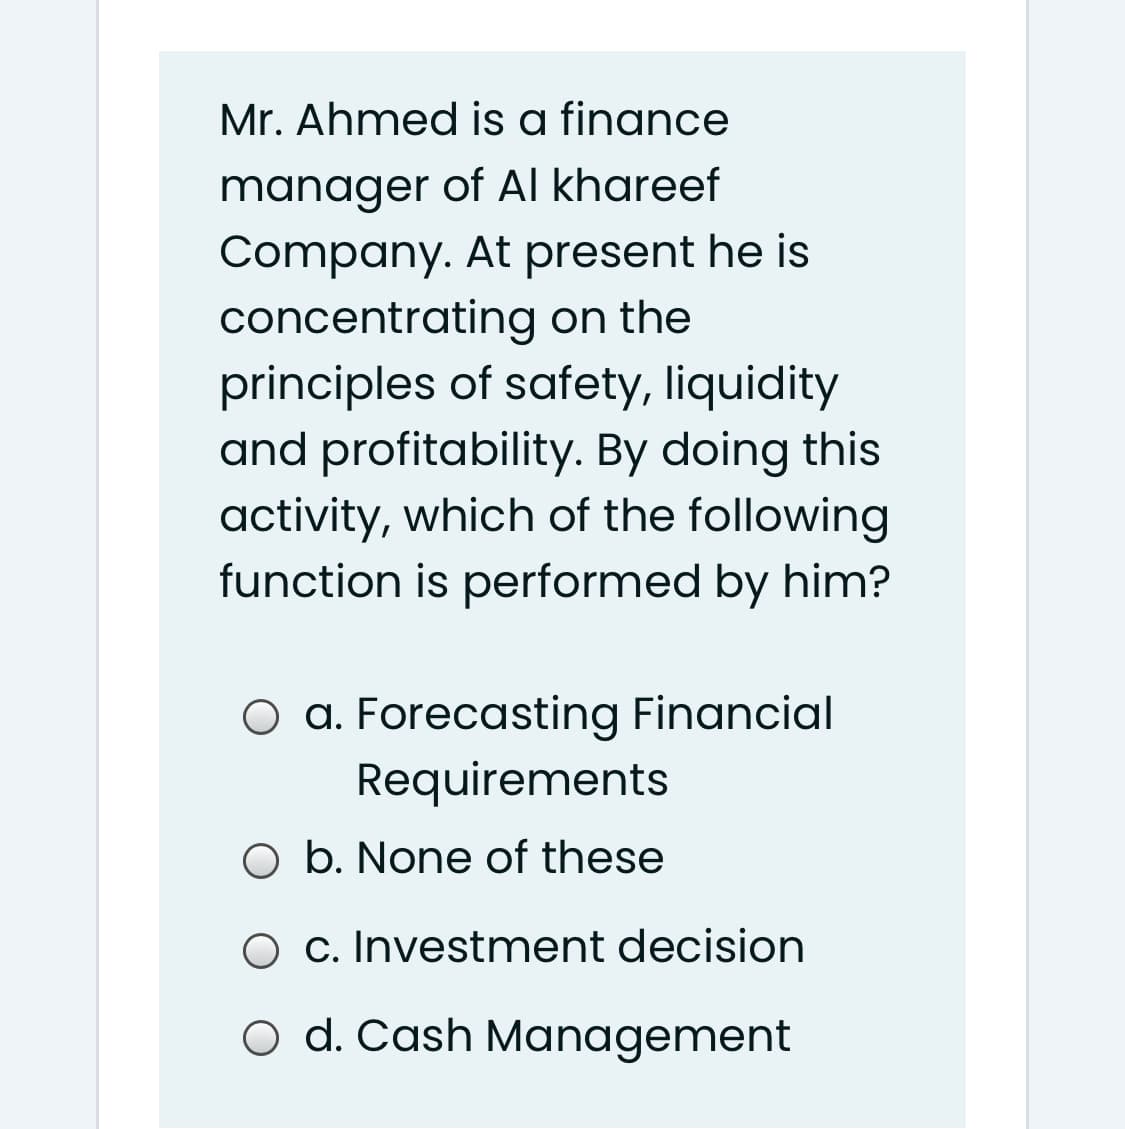 Mr. Ahmed is a finance
manager of Al khareef
Company. At present he is
concentrating on the
principles of safety, liquidity
and profitability. By doing this
activity, which of the following
function is performed by him?
O a. Forecasting Financial
Requirements
O b. None of these
O c. Investment decision
O d. Cash Management
